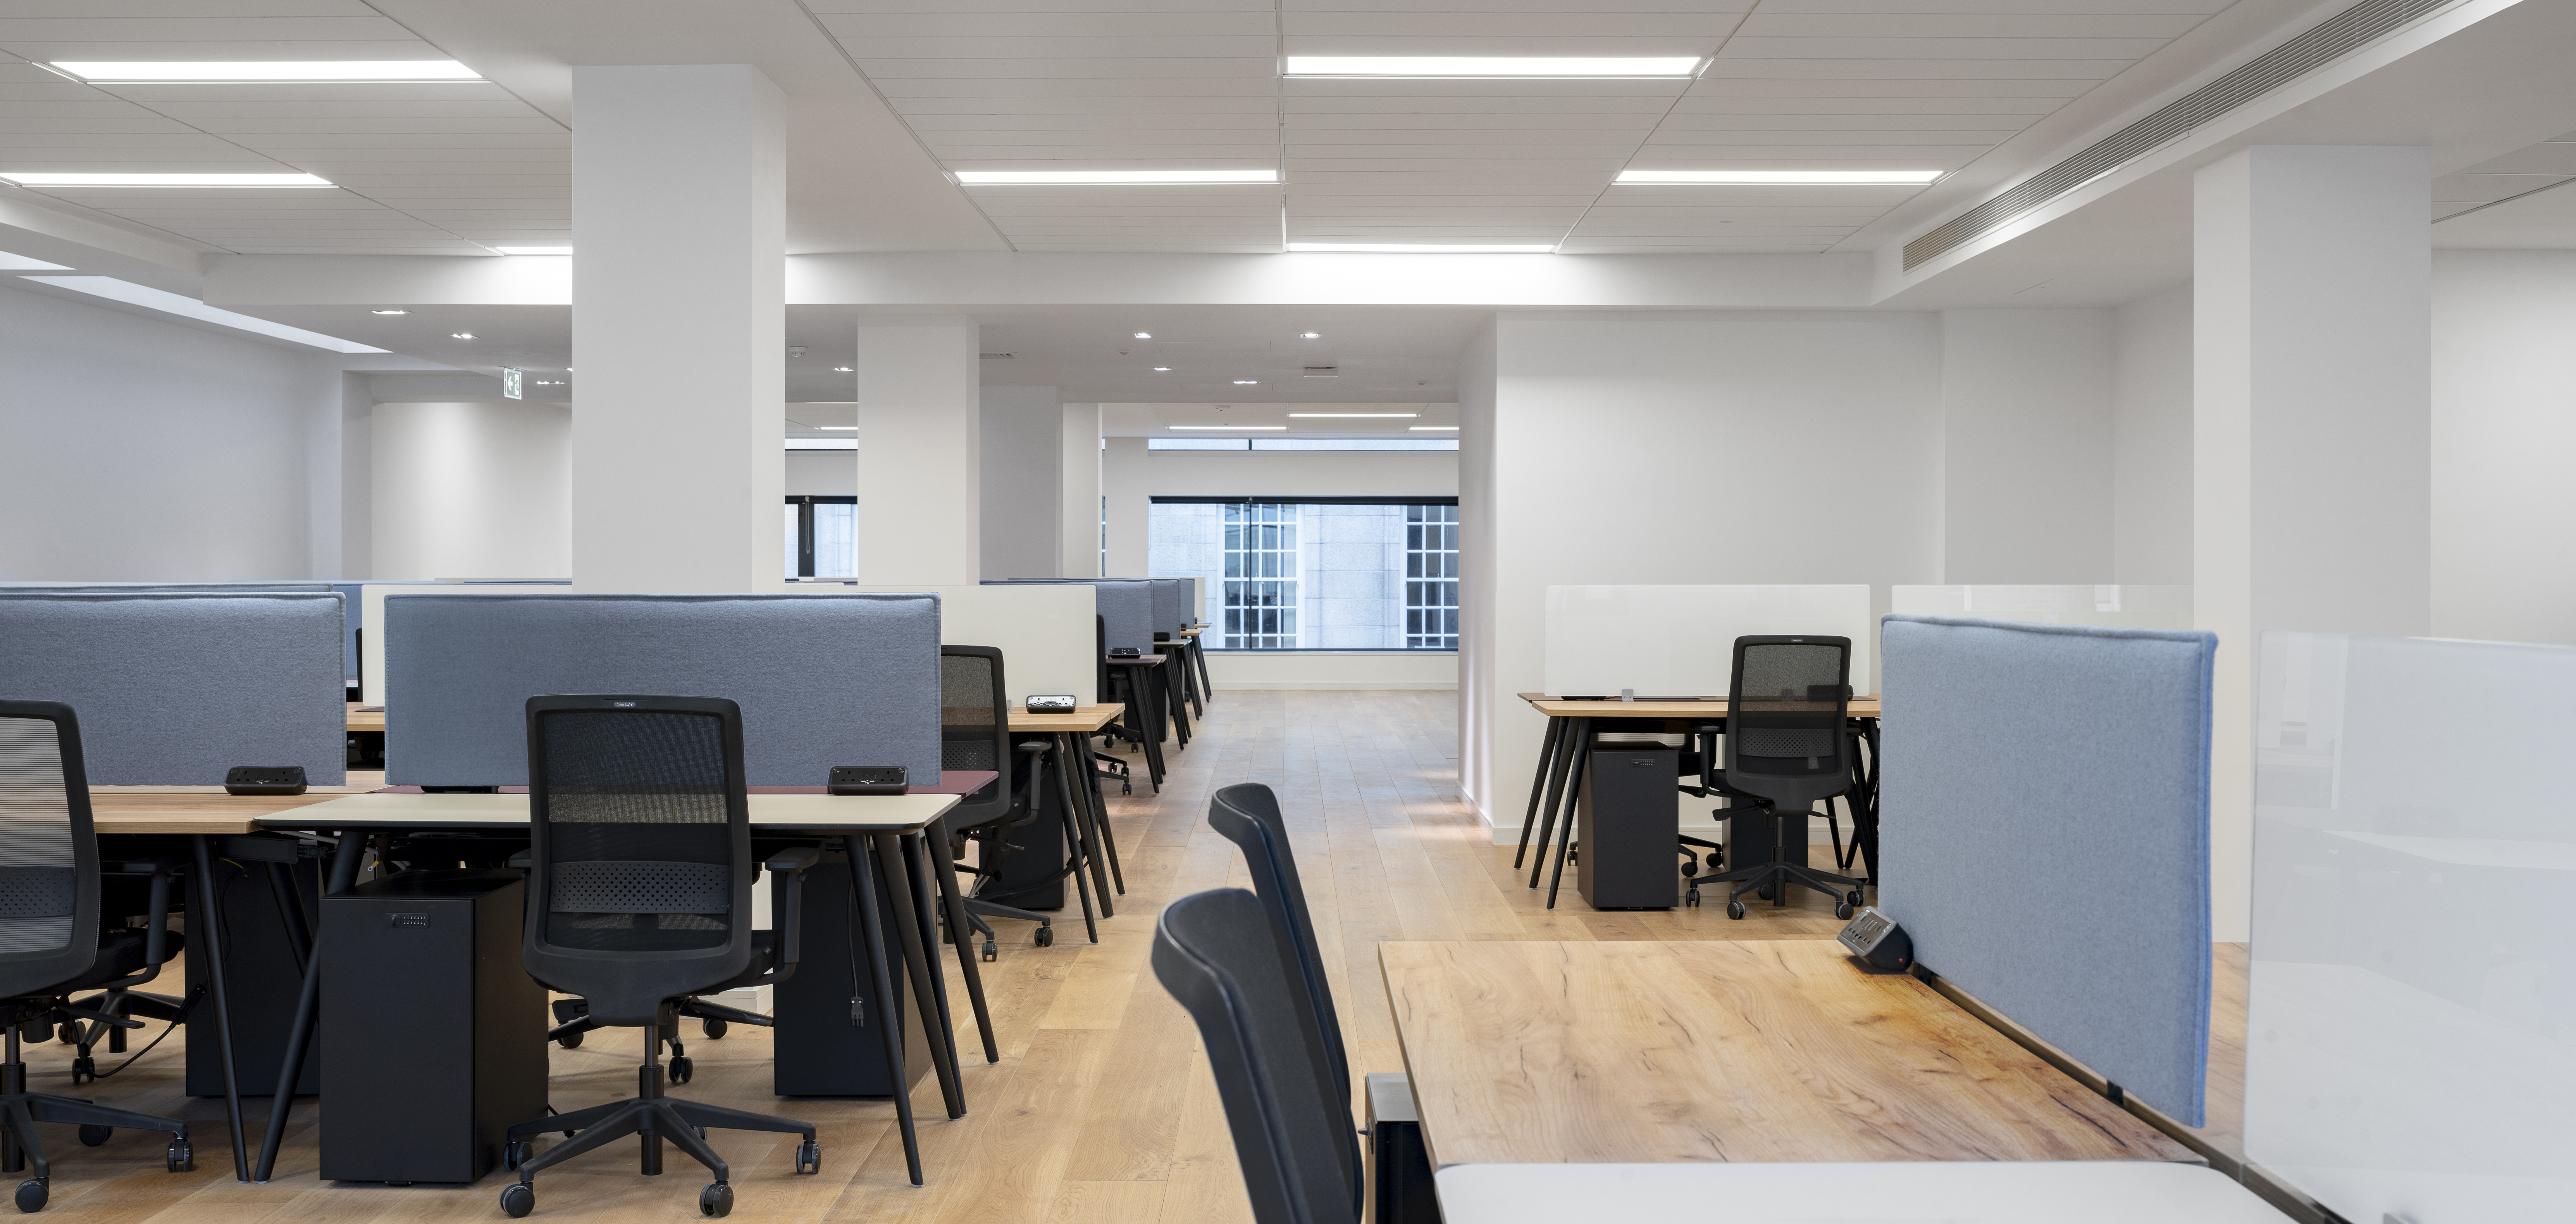 Highly professional co-working office spaces in London and Dublin ©donalmurphyphoto